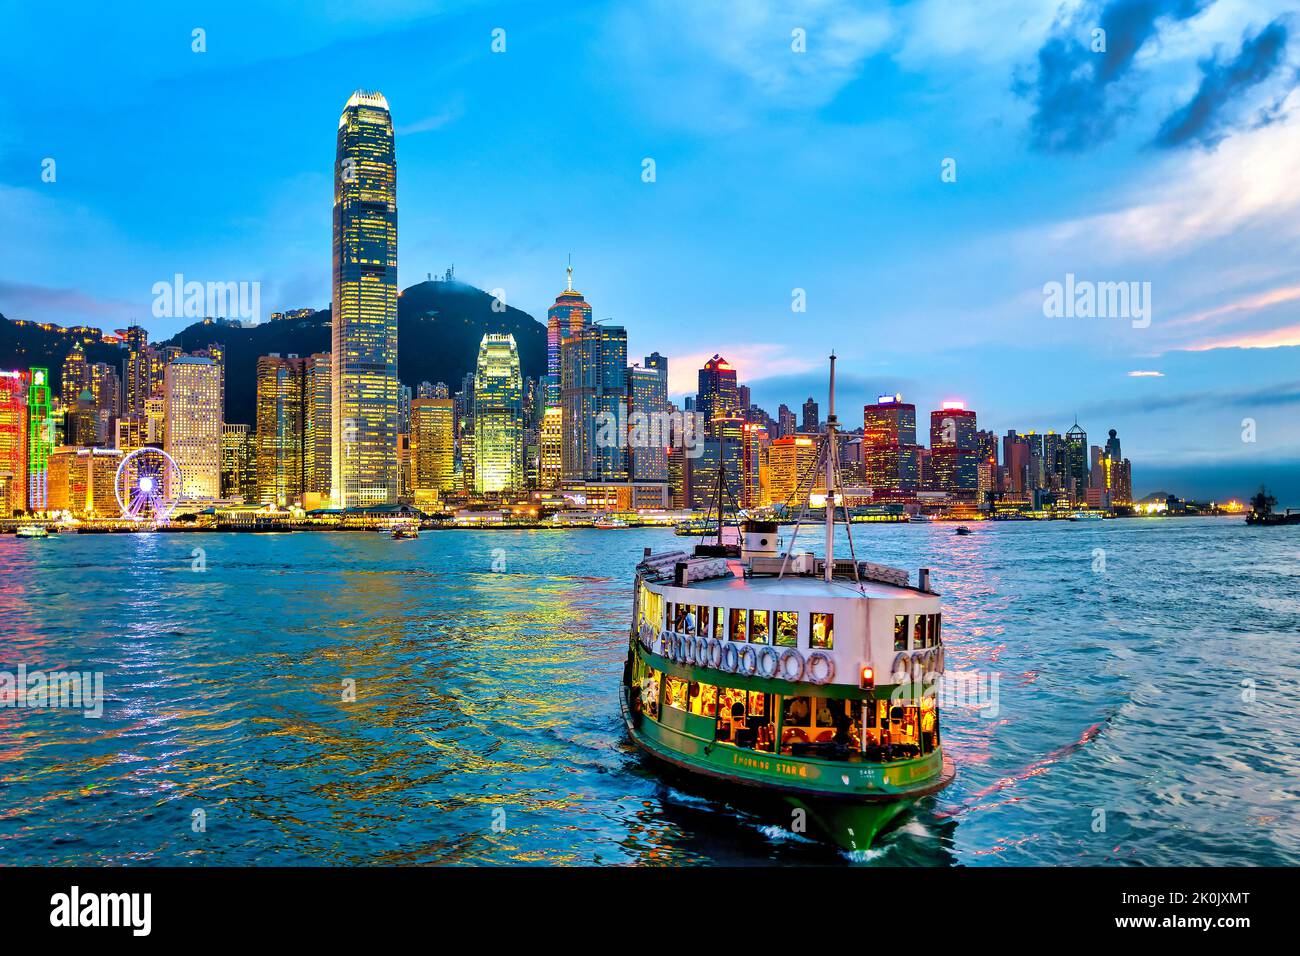 A star ferry in the Victoria Harbour at sunset, Hong Kong, China Stock Photo